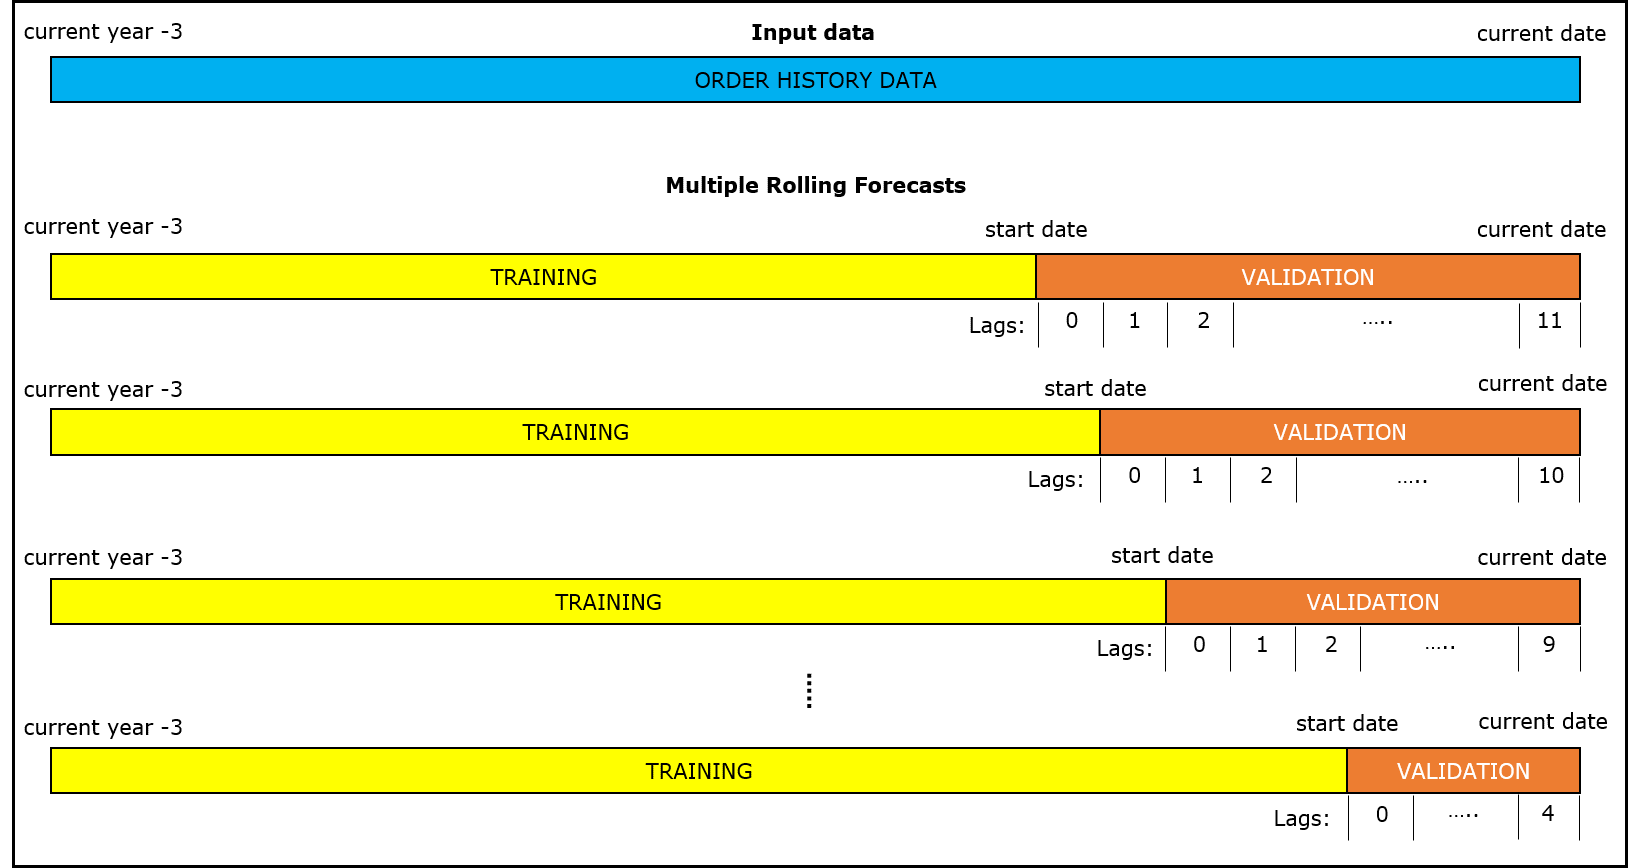 Figure 2. Demonstration of how orders history data was split for multiple rolling weekly forecasts.